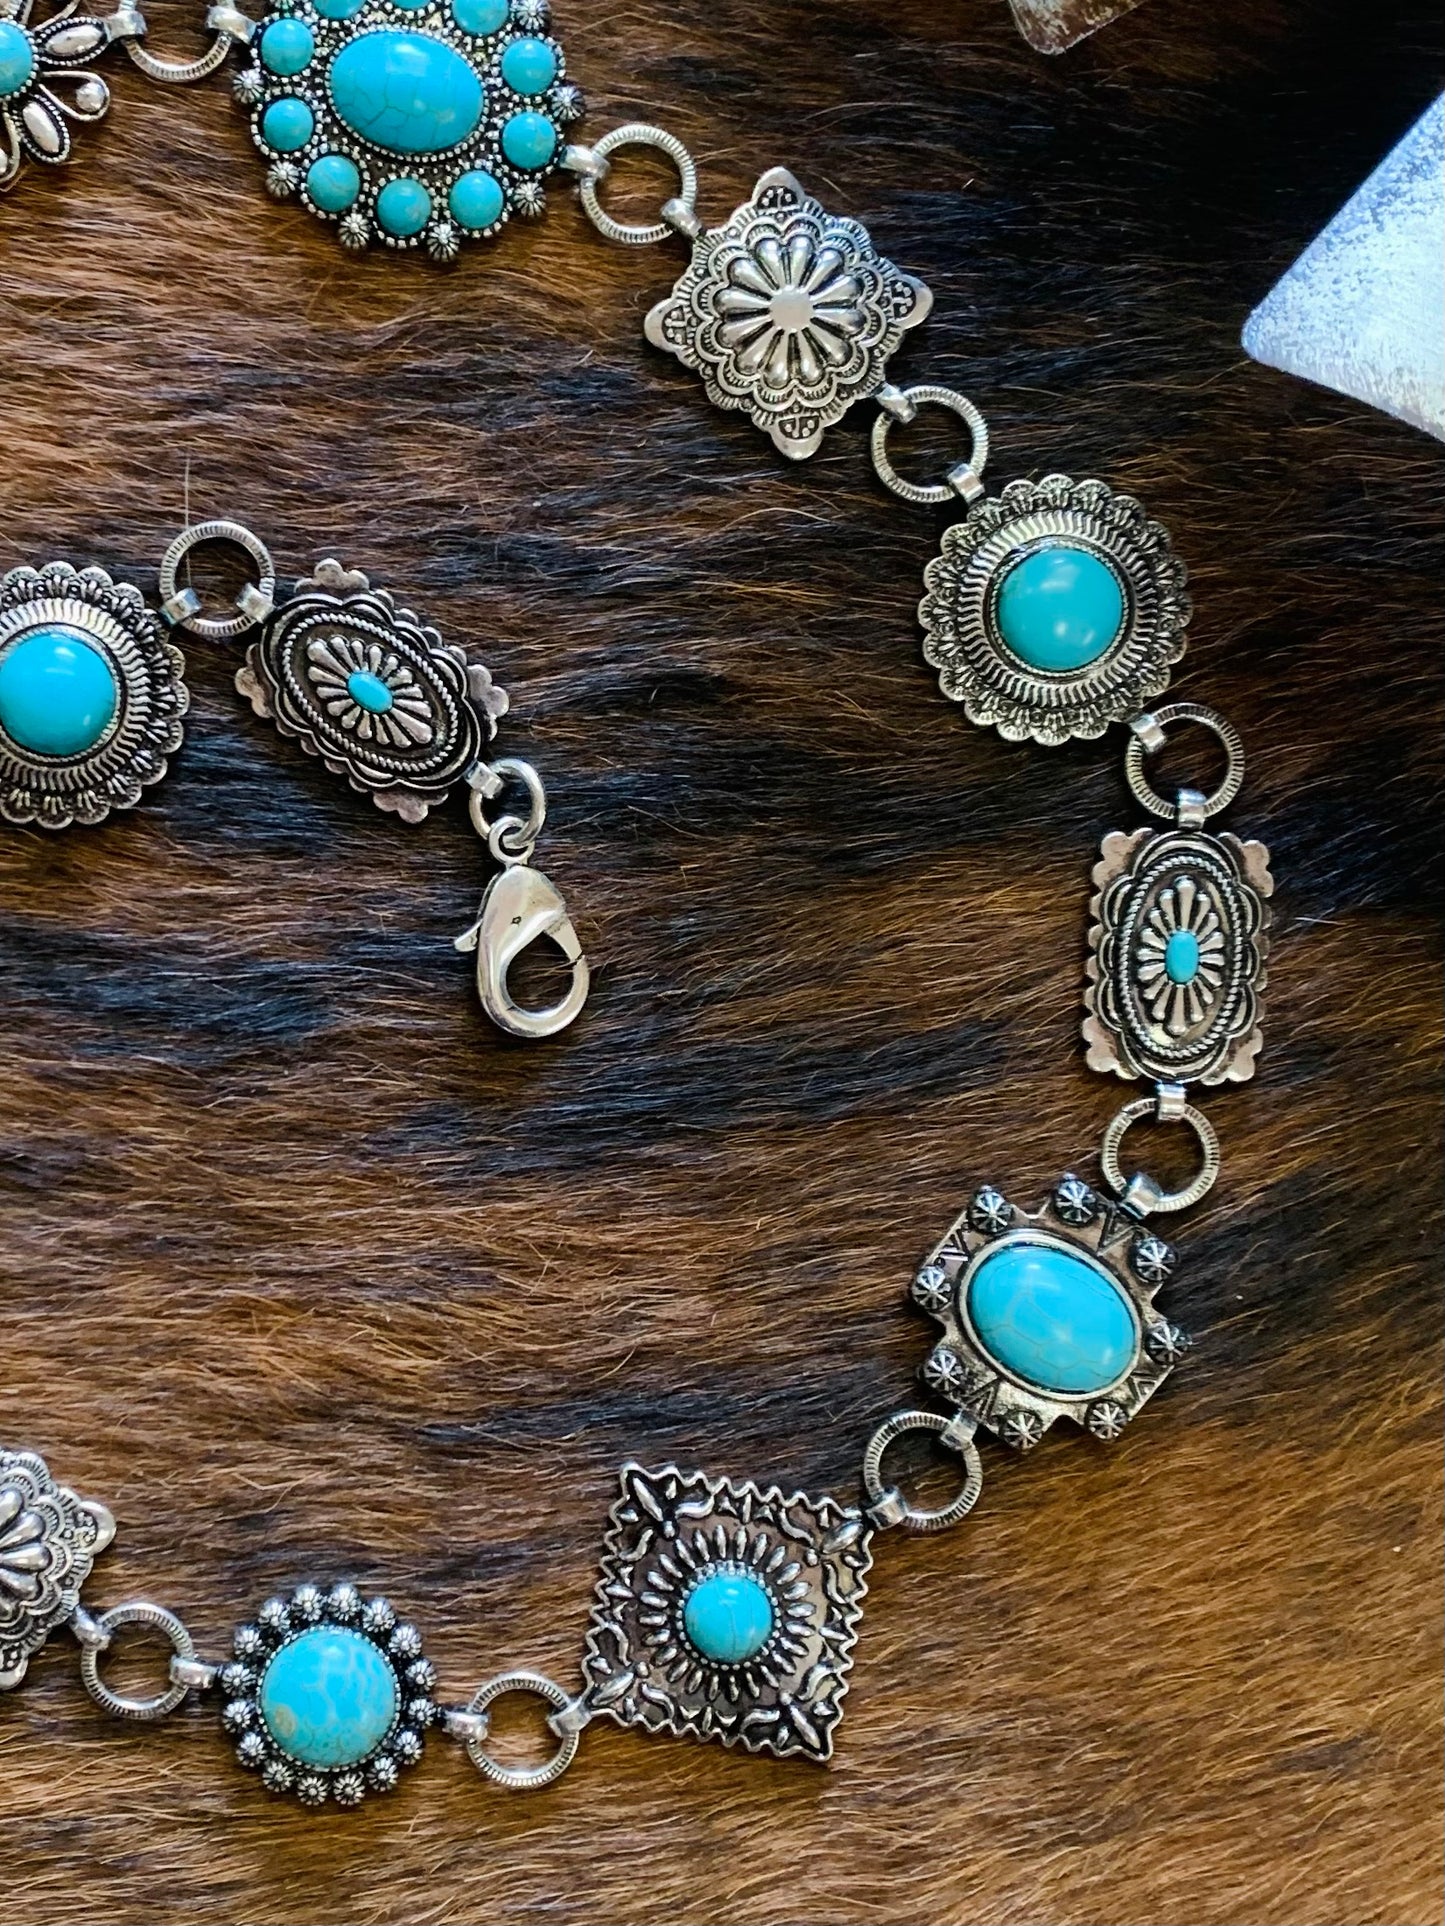 “Sterling Cowgirl” Concho Belt